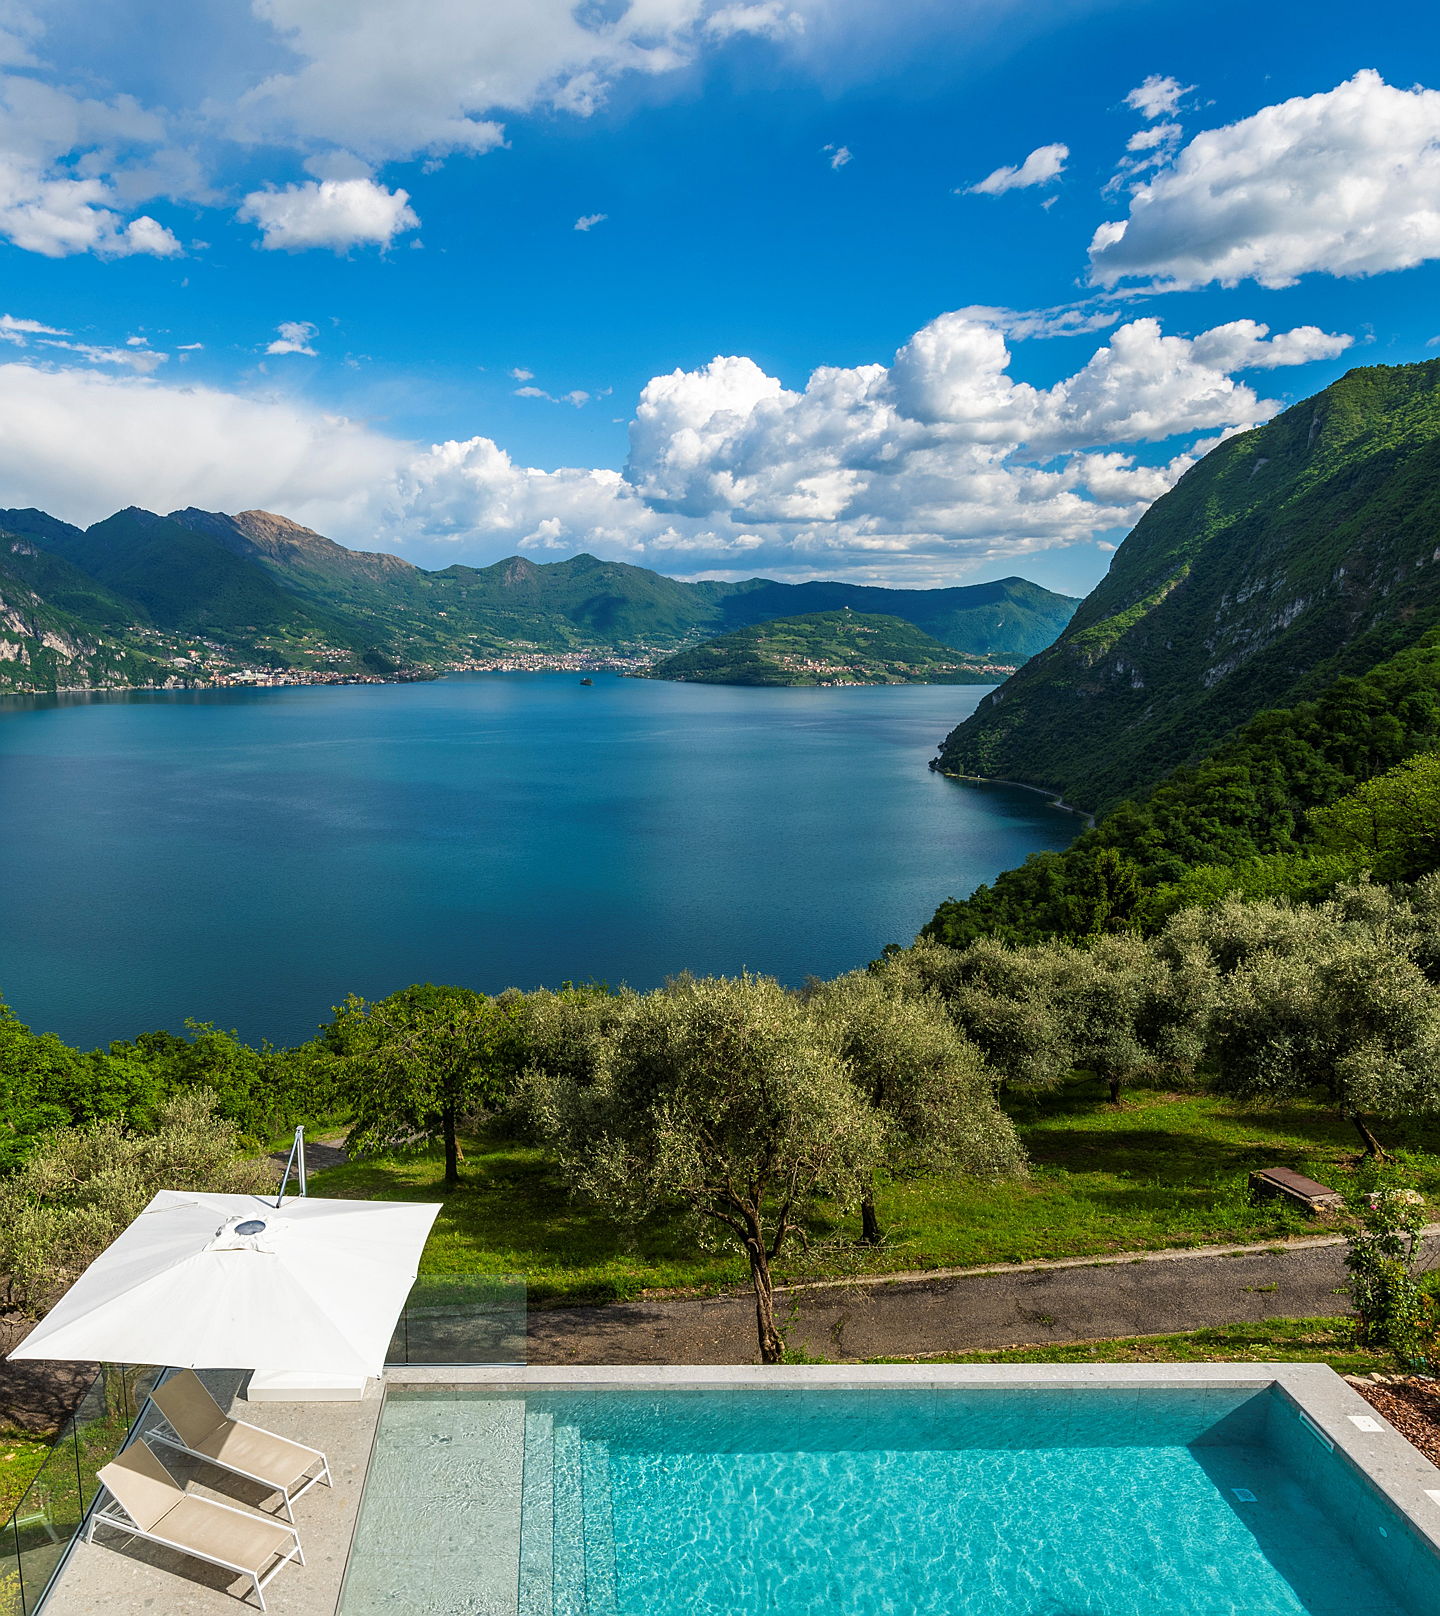  Iseo
- Neue Immobilien am Iseosee